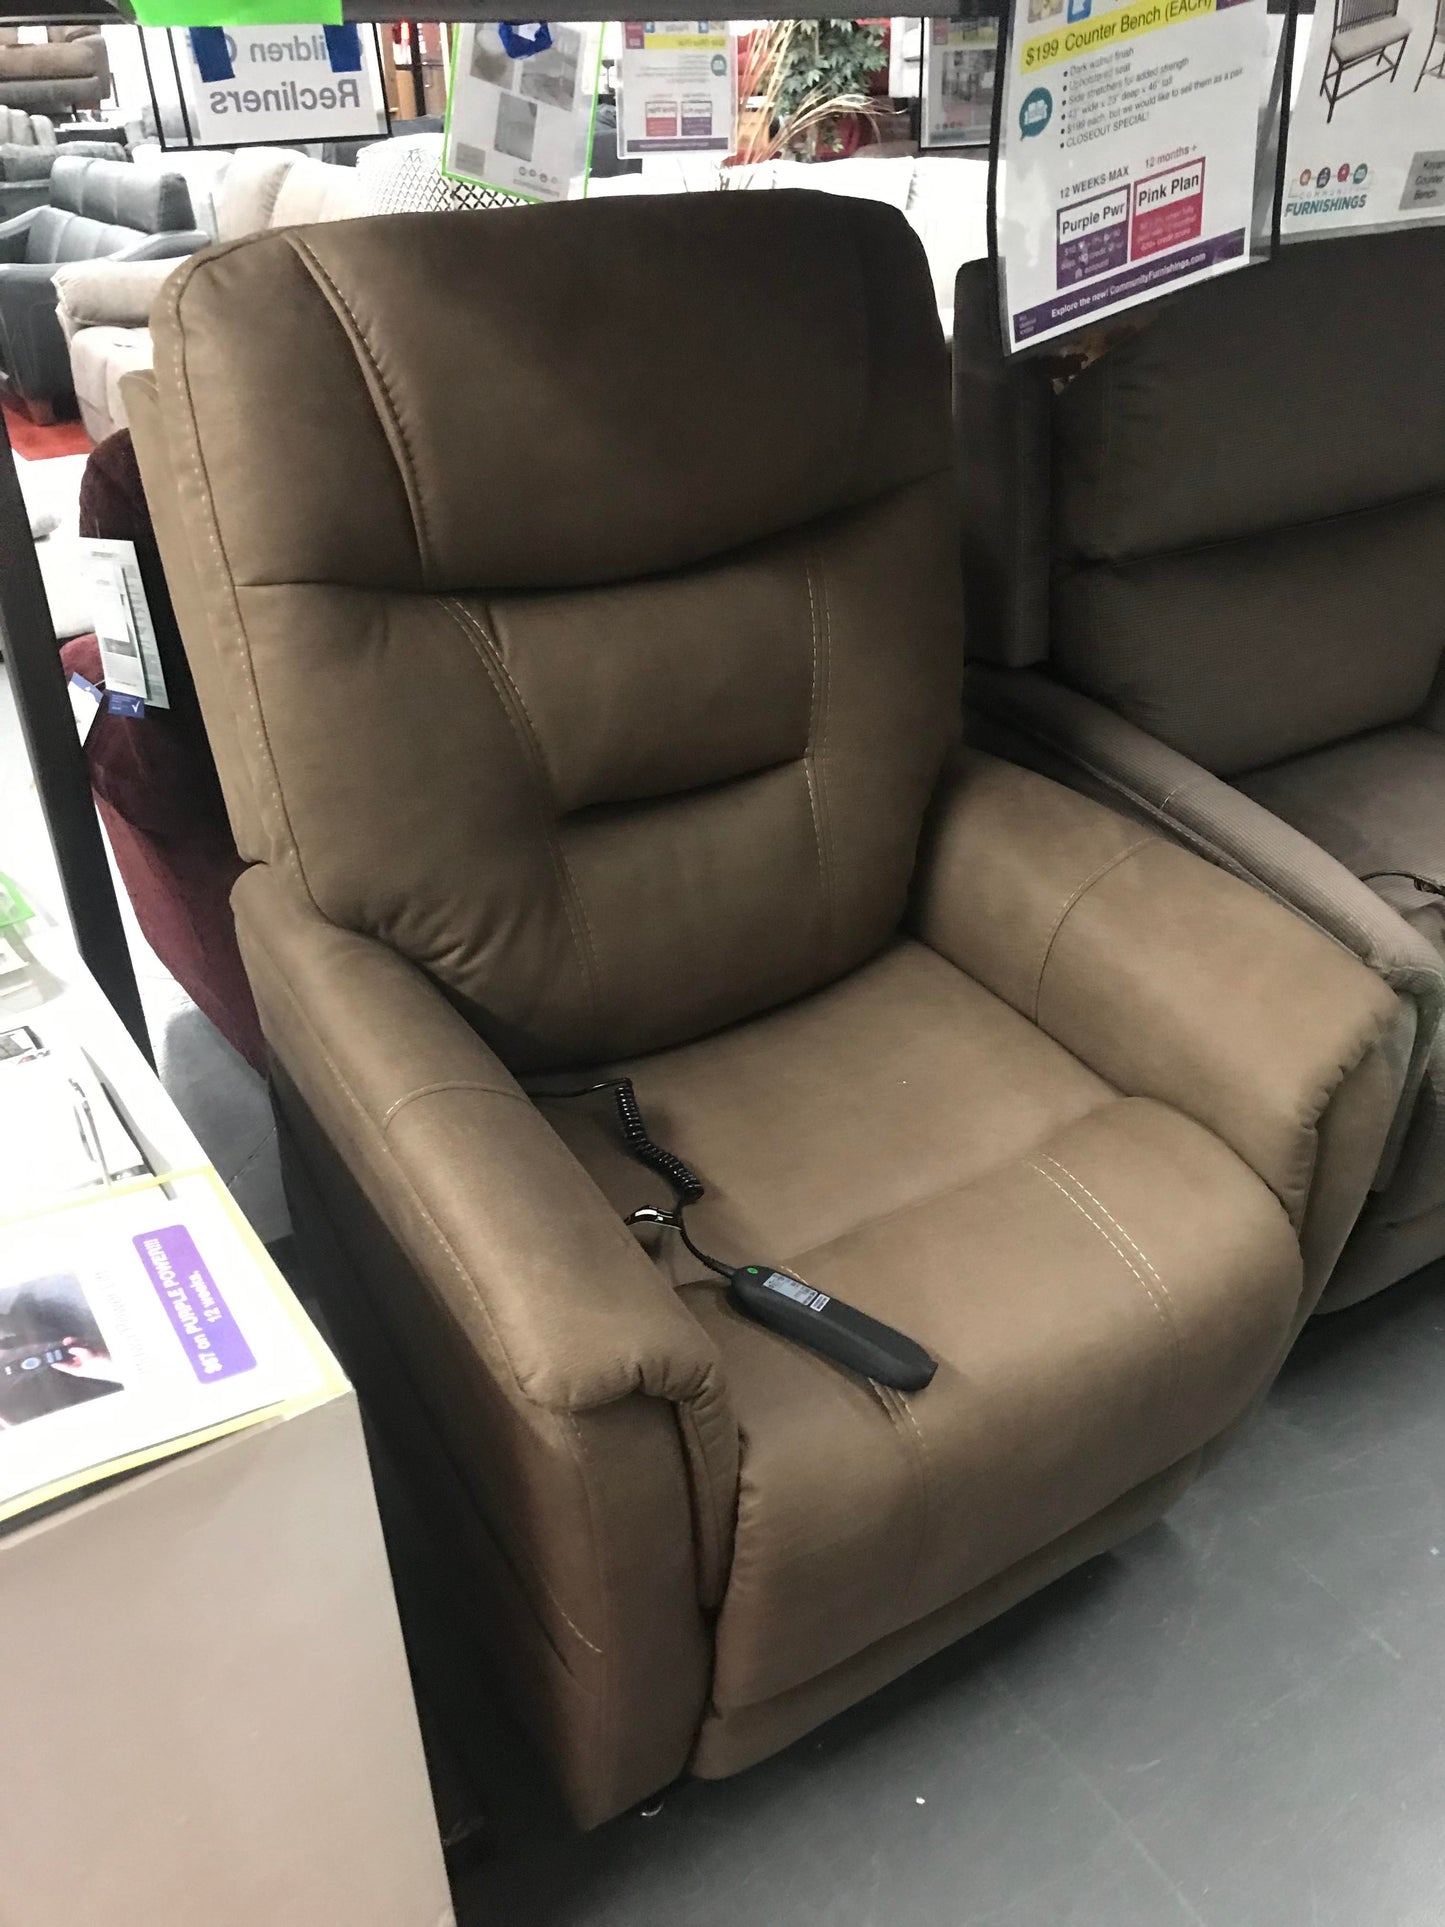 WEEKLY or MONTHLY. Clement Power Lift Recliner